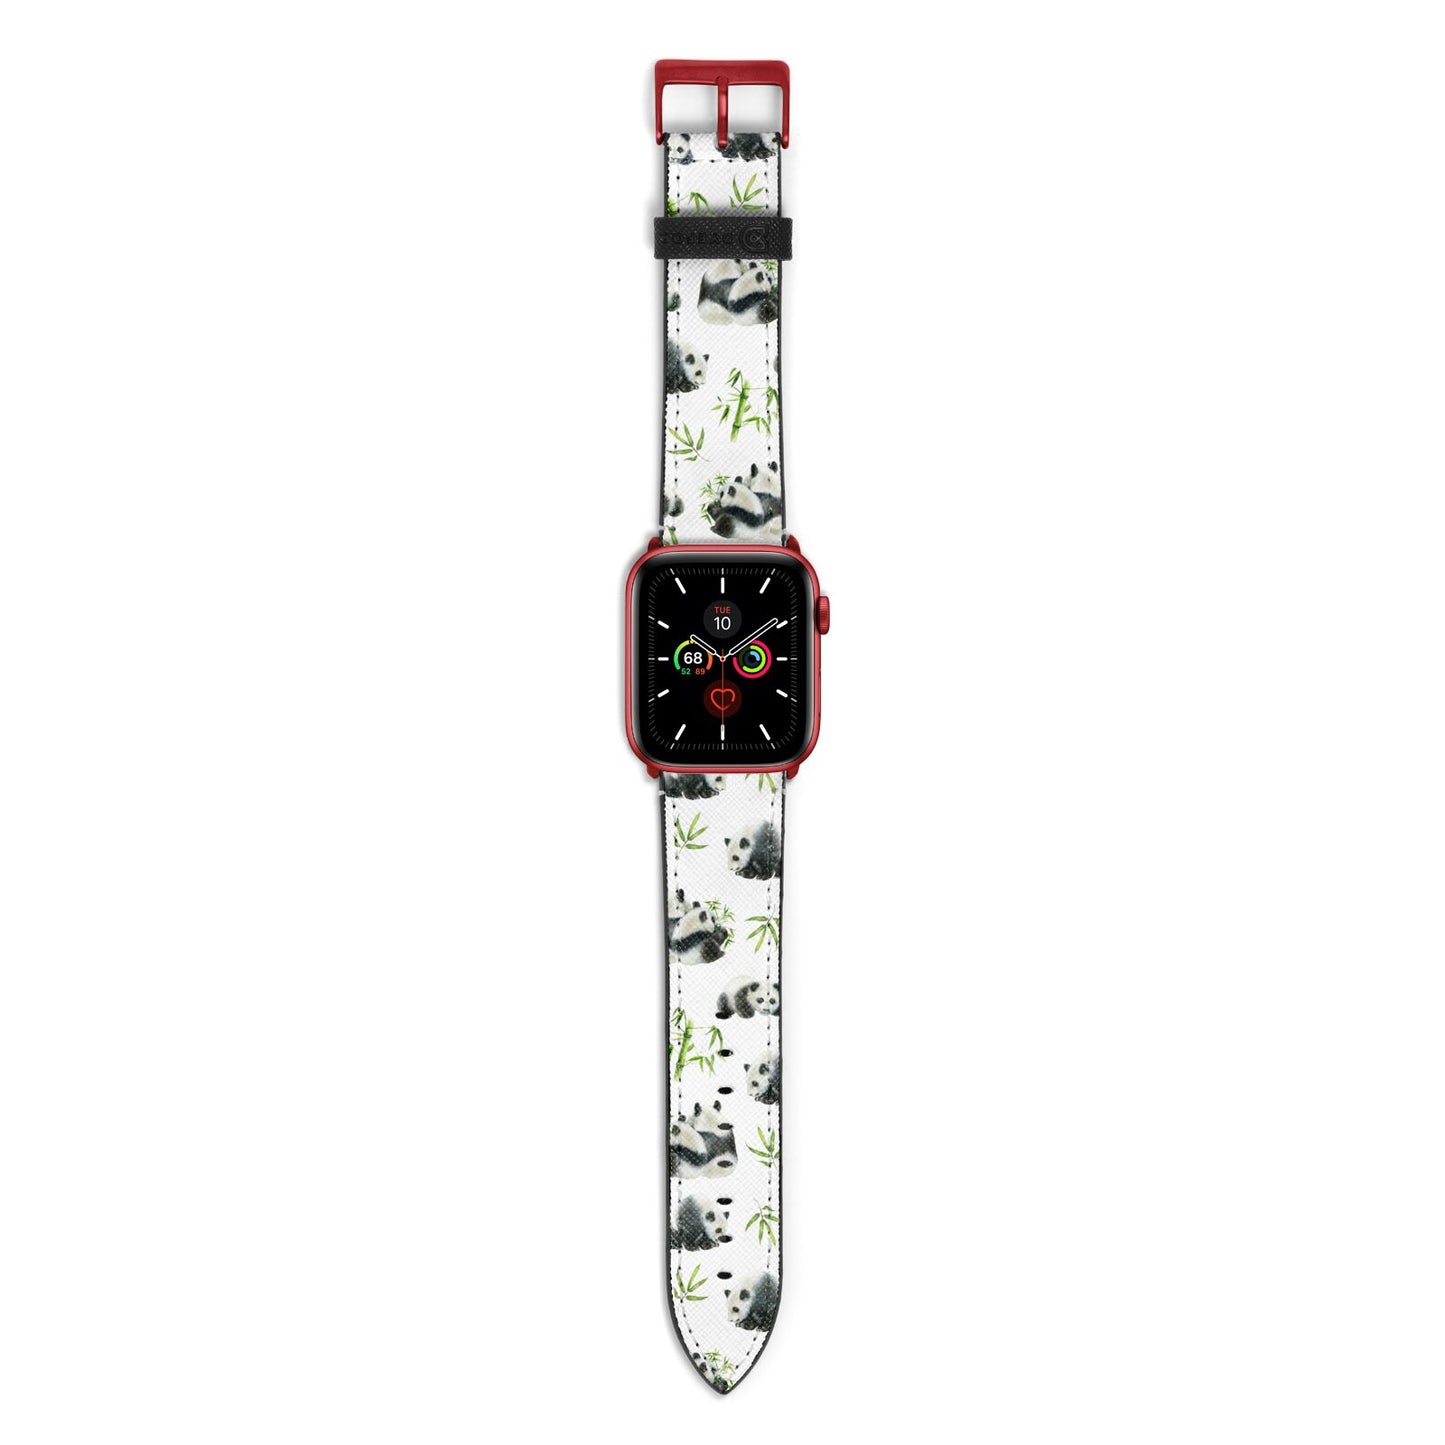 Panda Apple Watch Strap with Red Hardware